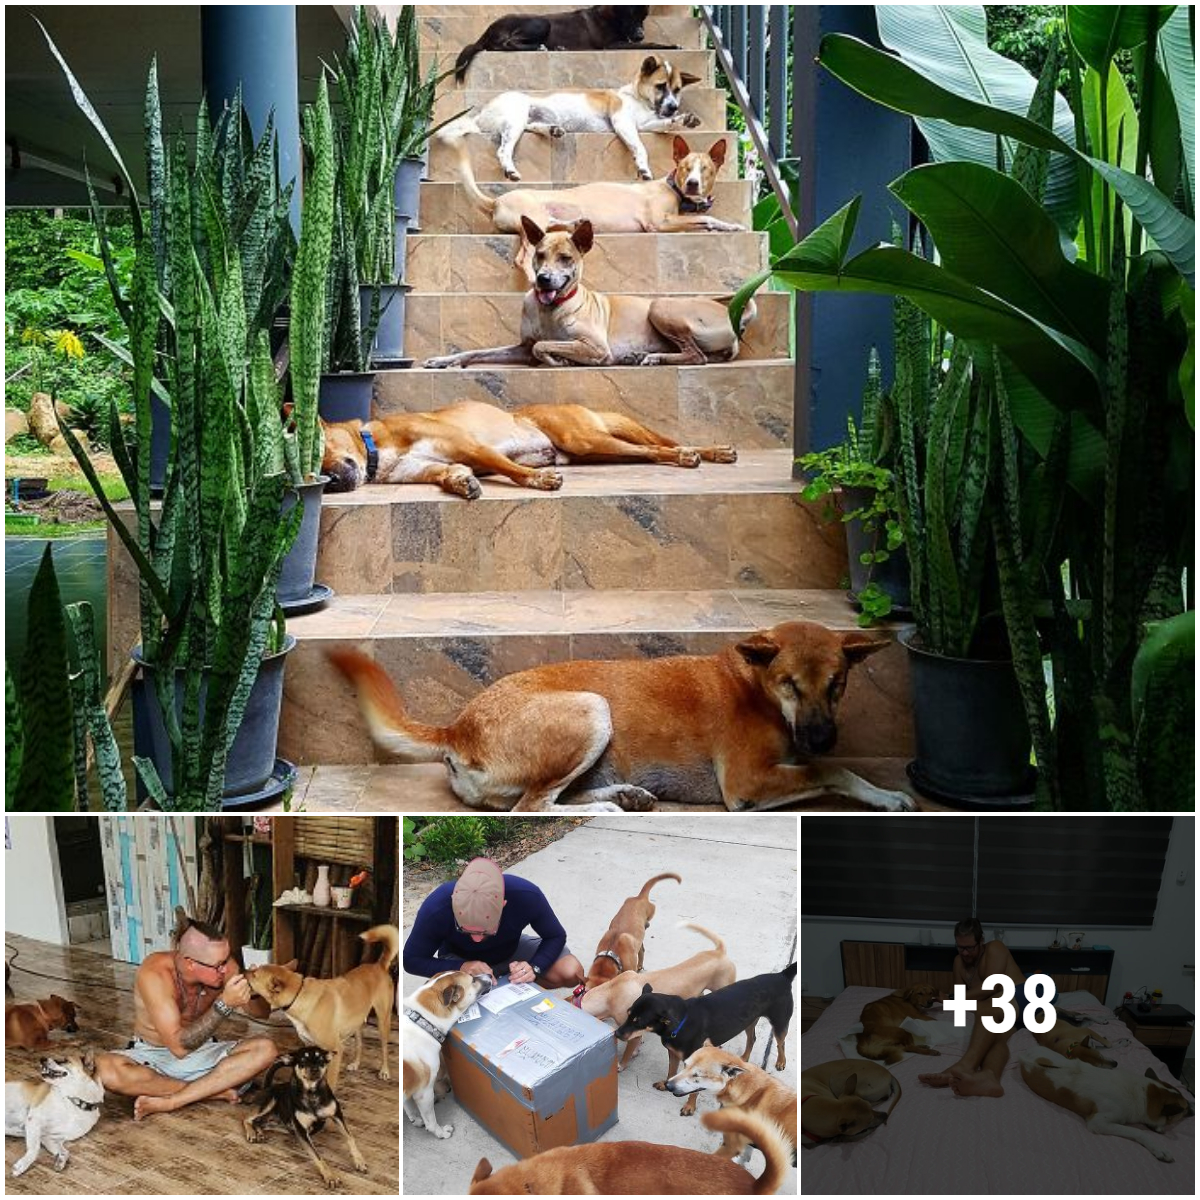 After losing ten YO Dogo pets, the couple relocated to an island in Thailand and adopted fifteen stray dogs.